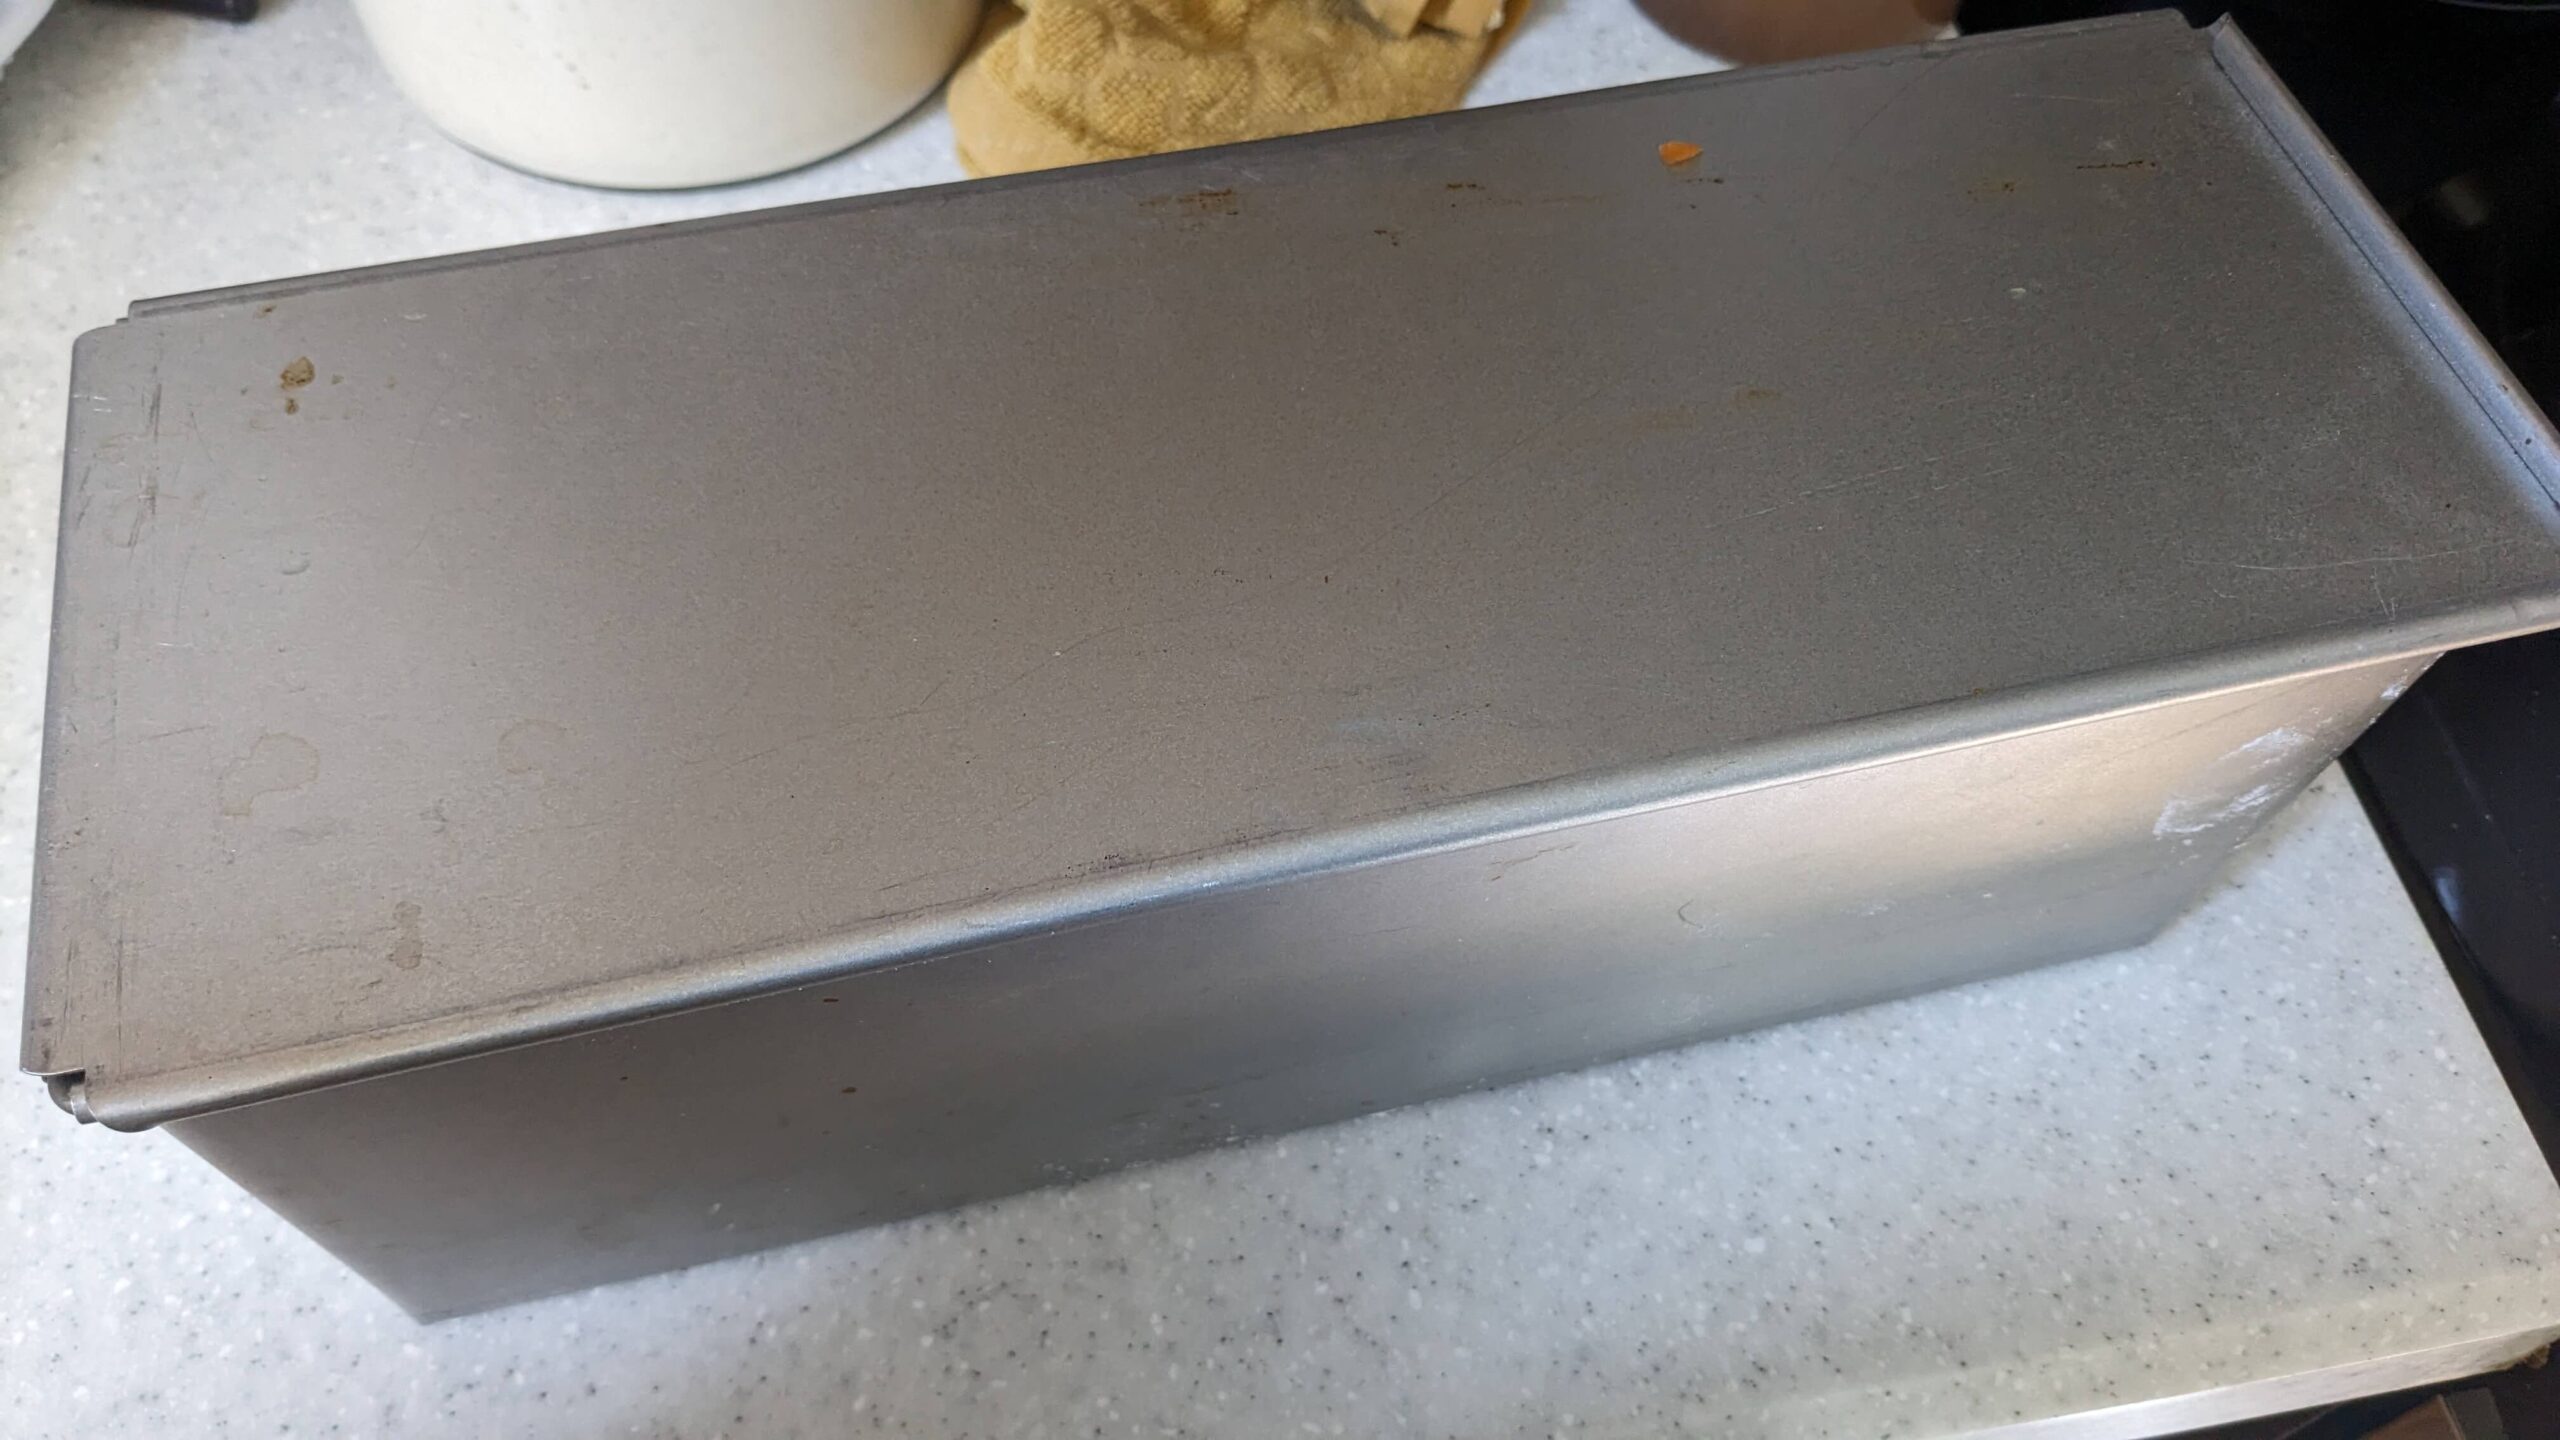 pullman loaf pan with lid